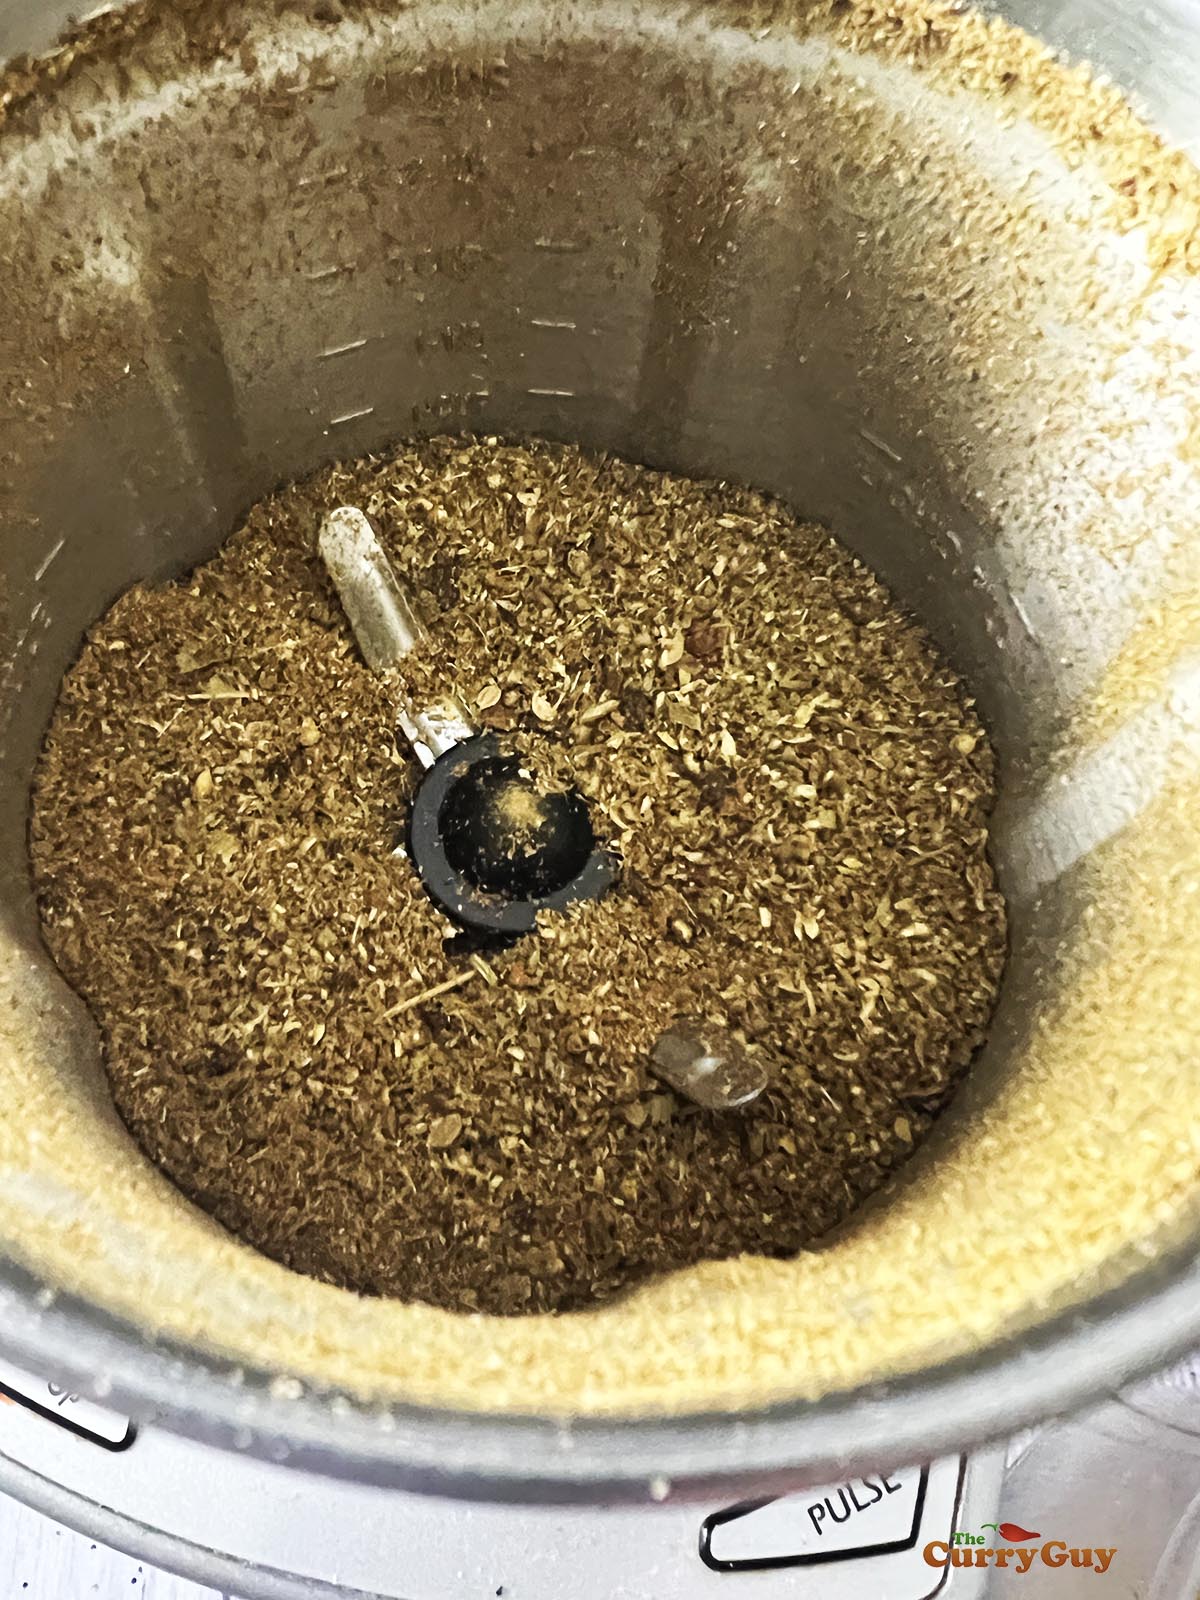 Grinding the spices in a spice grinder.